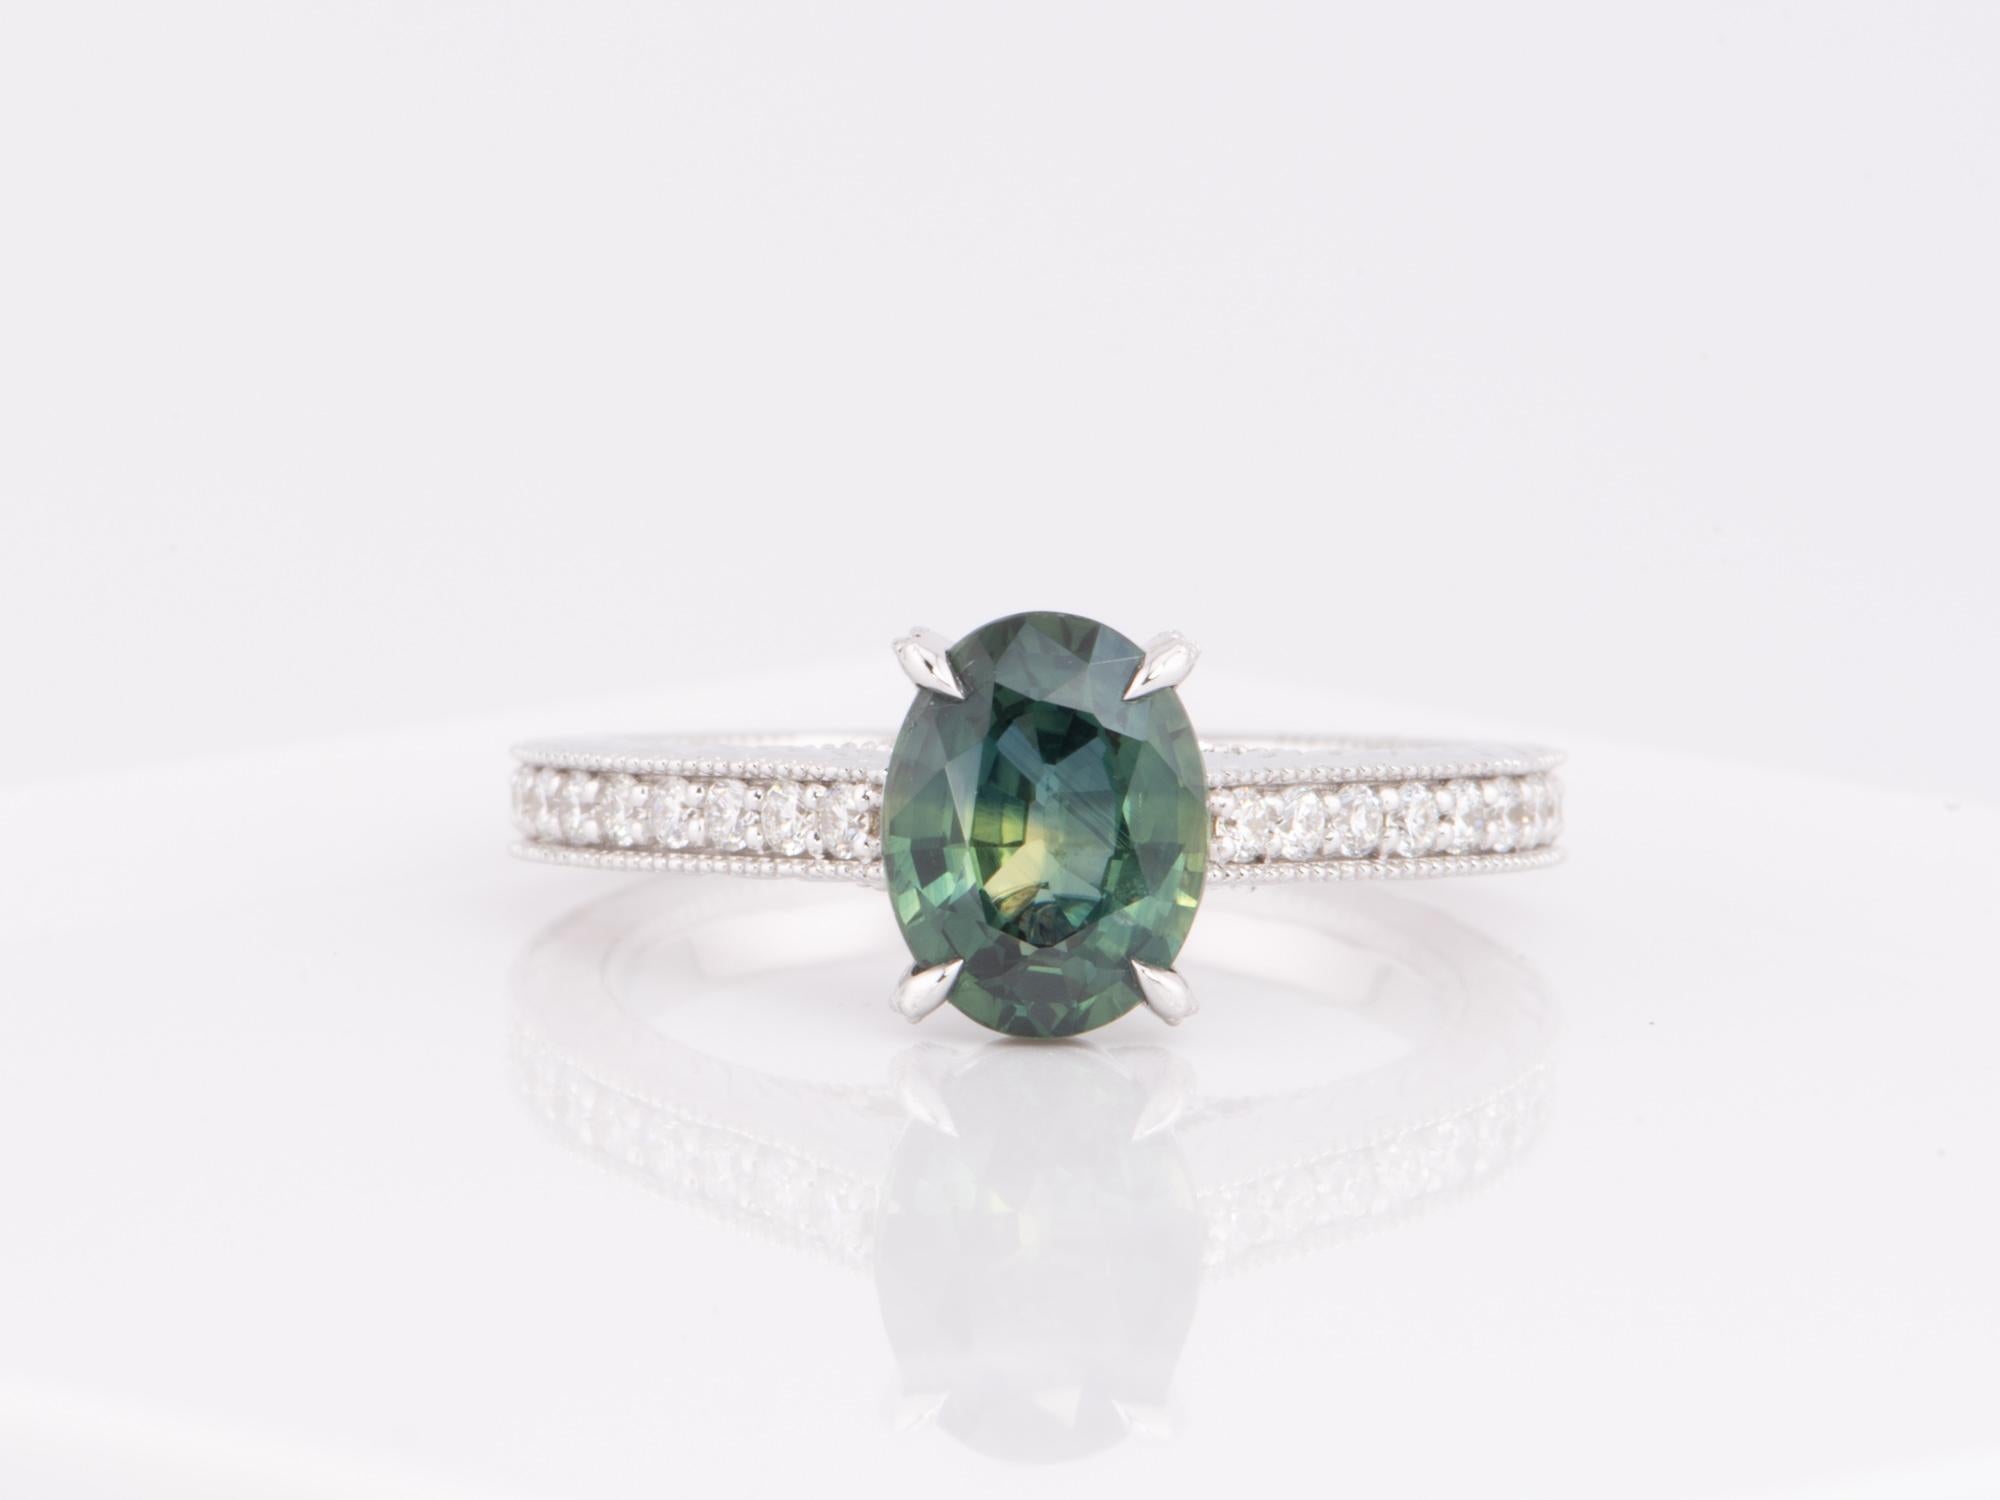 Uncut 2.99ct Teal Sapphire Engagement Ring 14K White Gold with Leaf Engraving R6598 For Sale